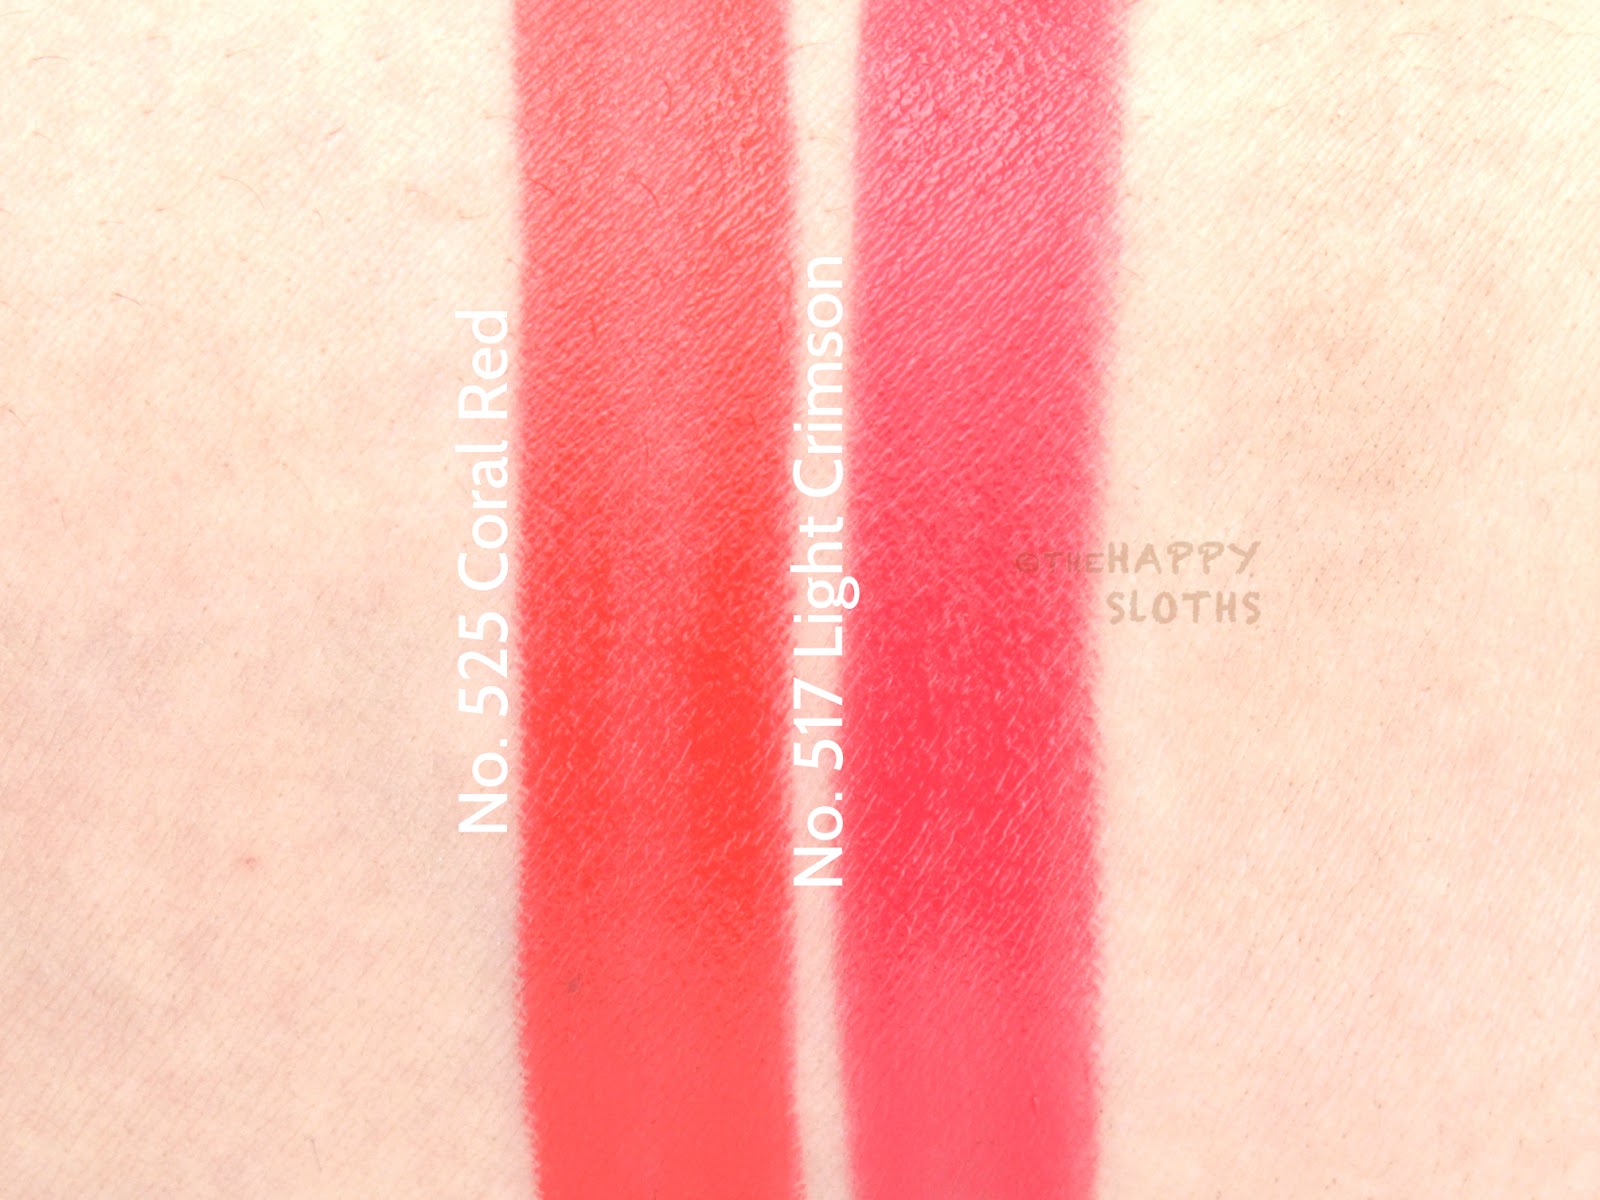 Burberry Full Kisses Lip Colors: Review and Swatches | The Happy Sloths:  Beauty, Makeup, and Skincare Blog with Reviews and Swatches